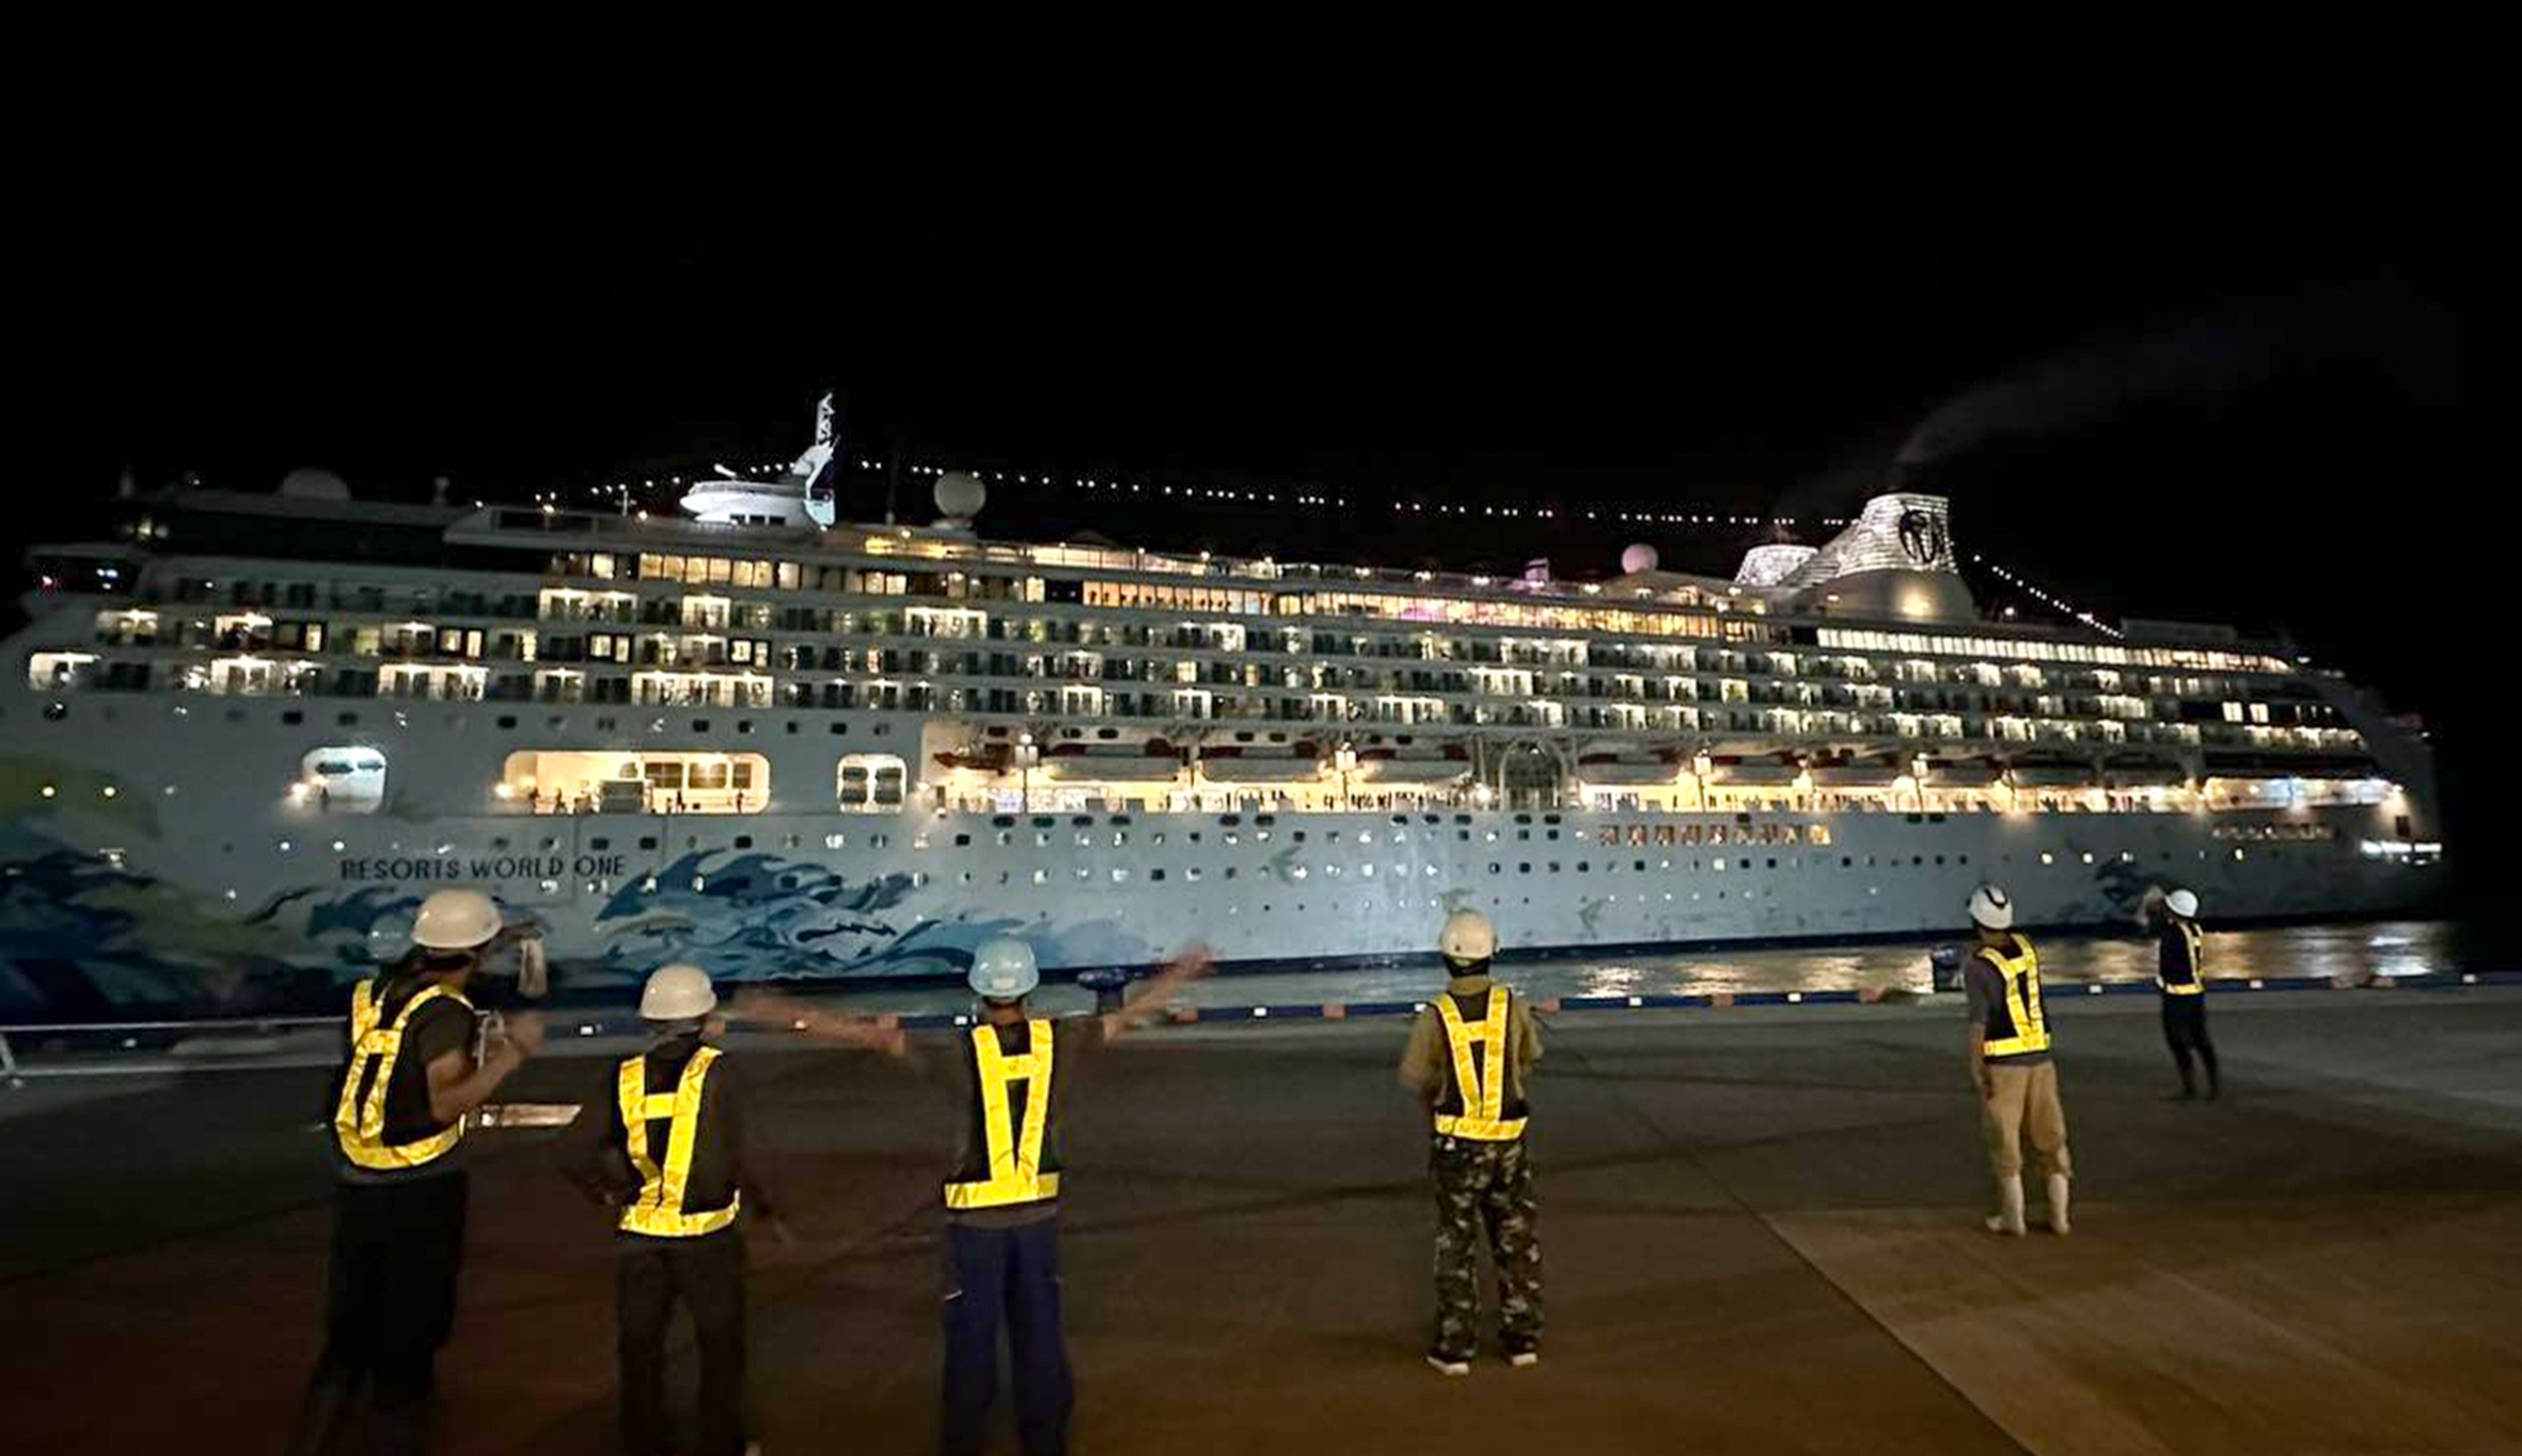 The Resorts World One cruise ship in Japan. The passengers are expected to return to Hong Kong on Friday morning. Photo: Facebook/石垣旅行社行程優惠站